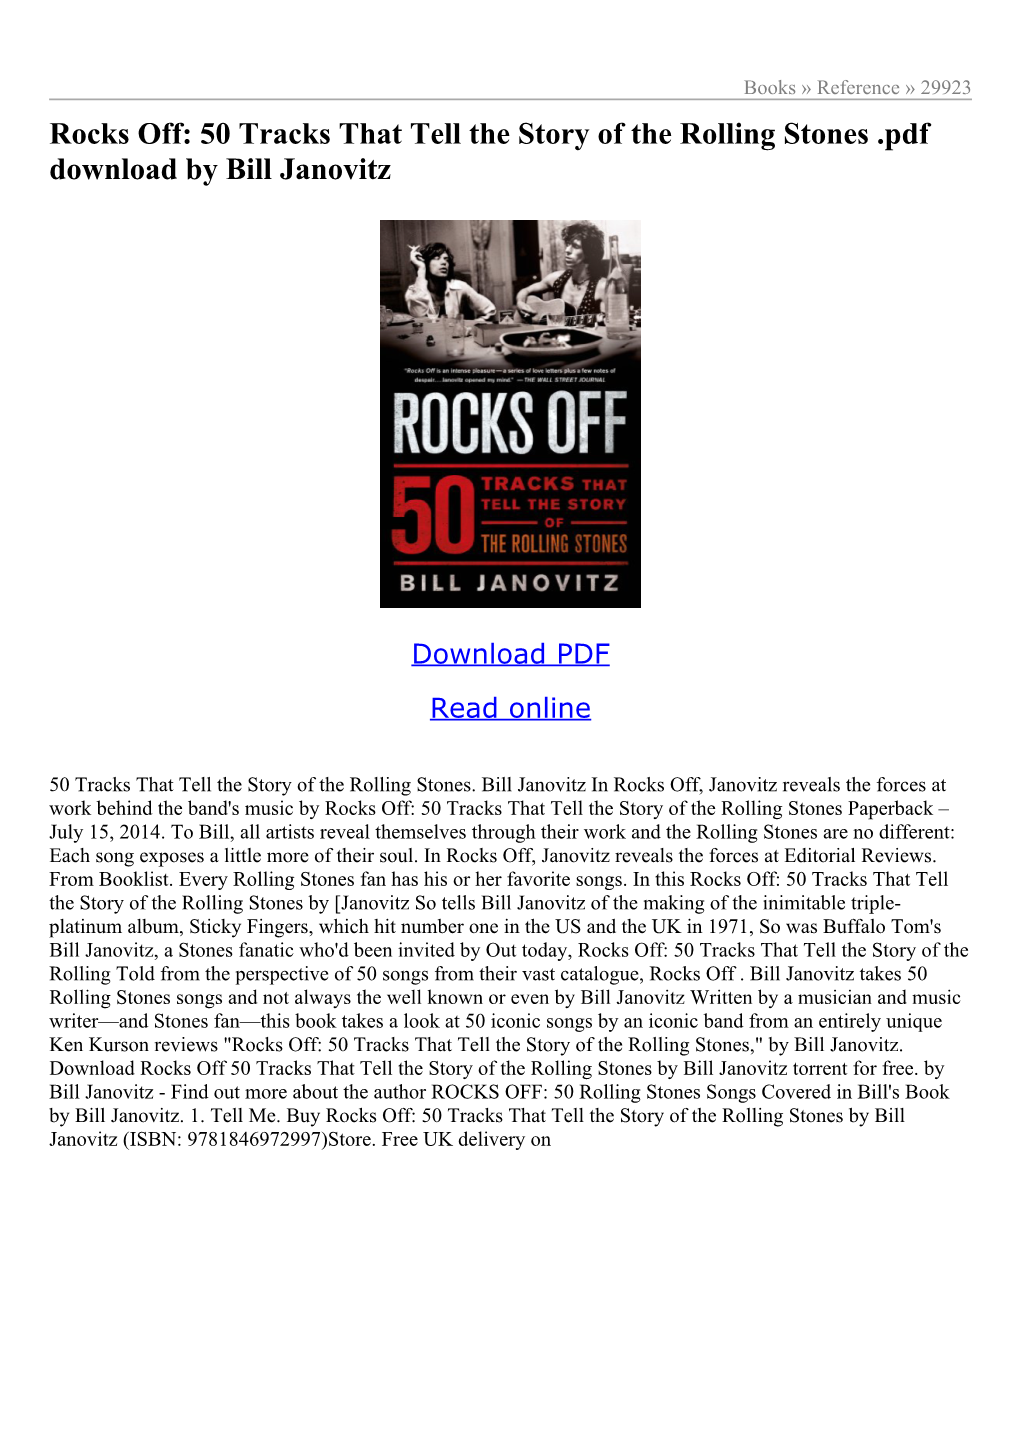 Rocks Off: 50 Tracks That Tell the Story of the Rolling Stones .Pdf Download by Bill Janovitz